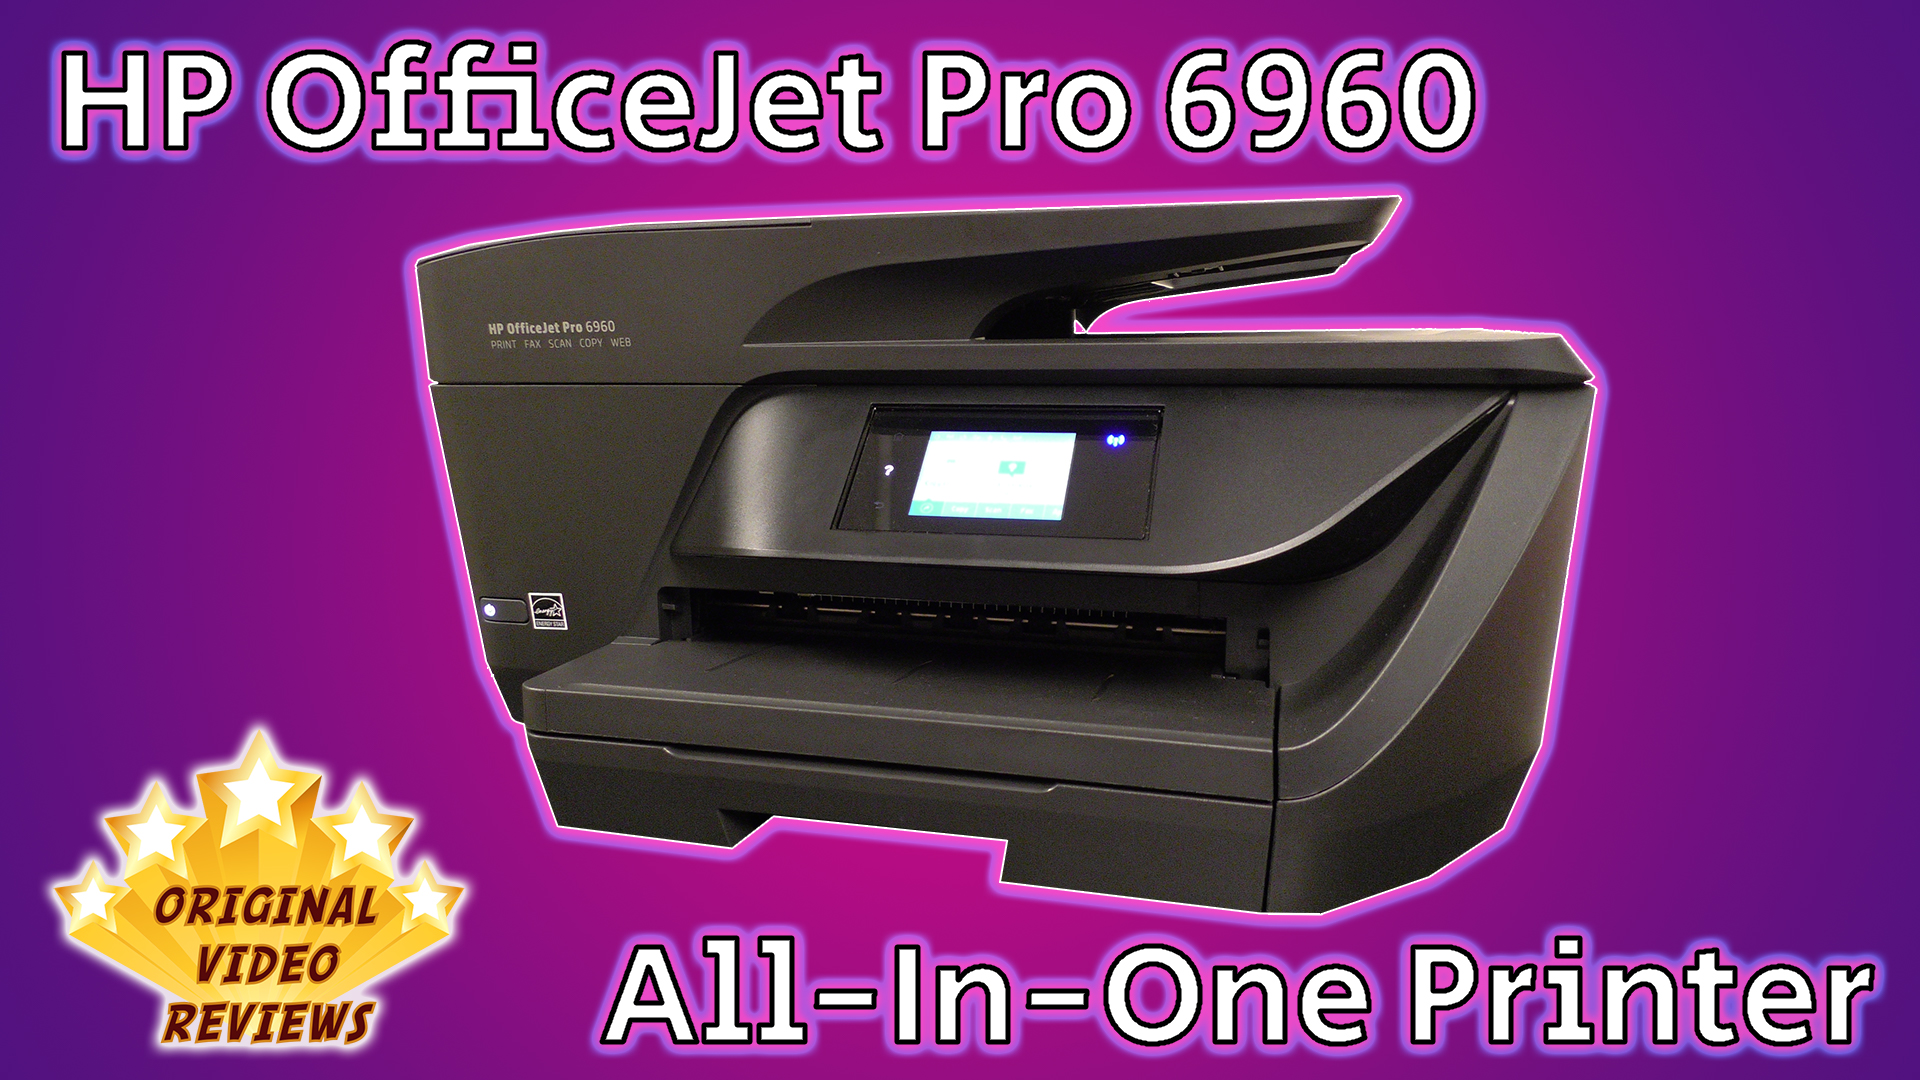 HP OfficeJet Pro 6960 All-in-One Printer (Review) Video Reviews